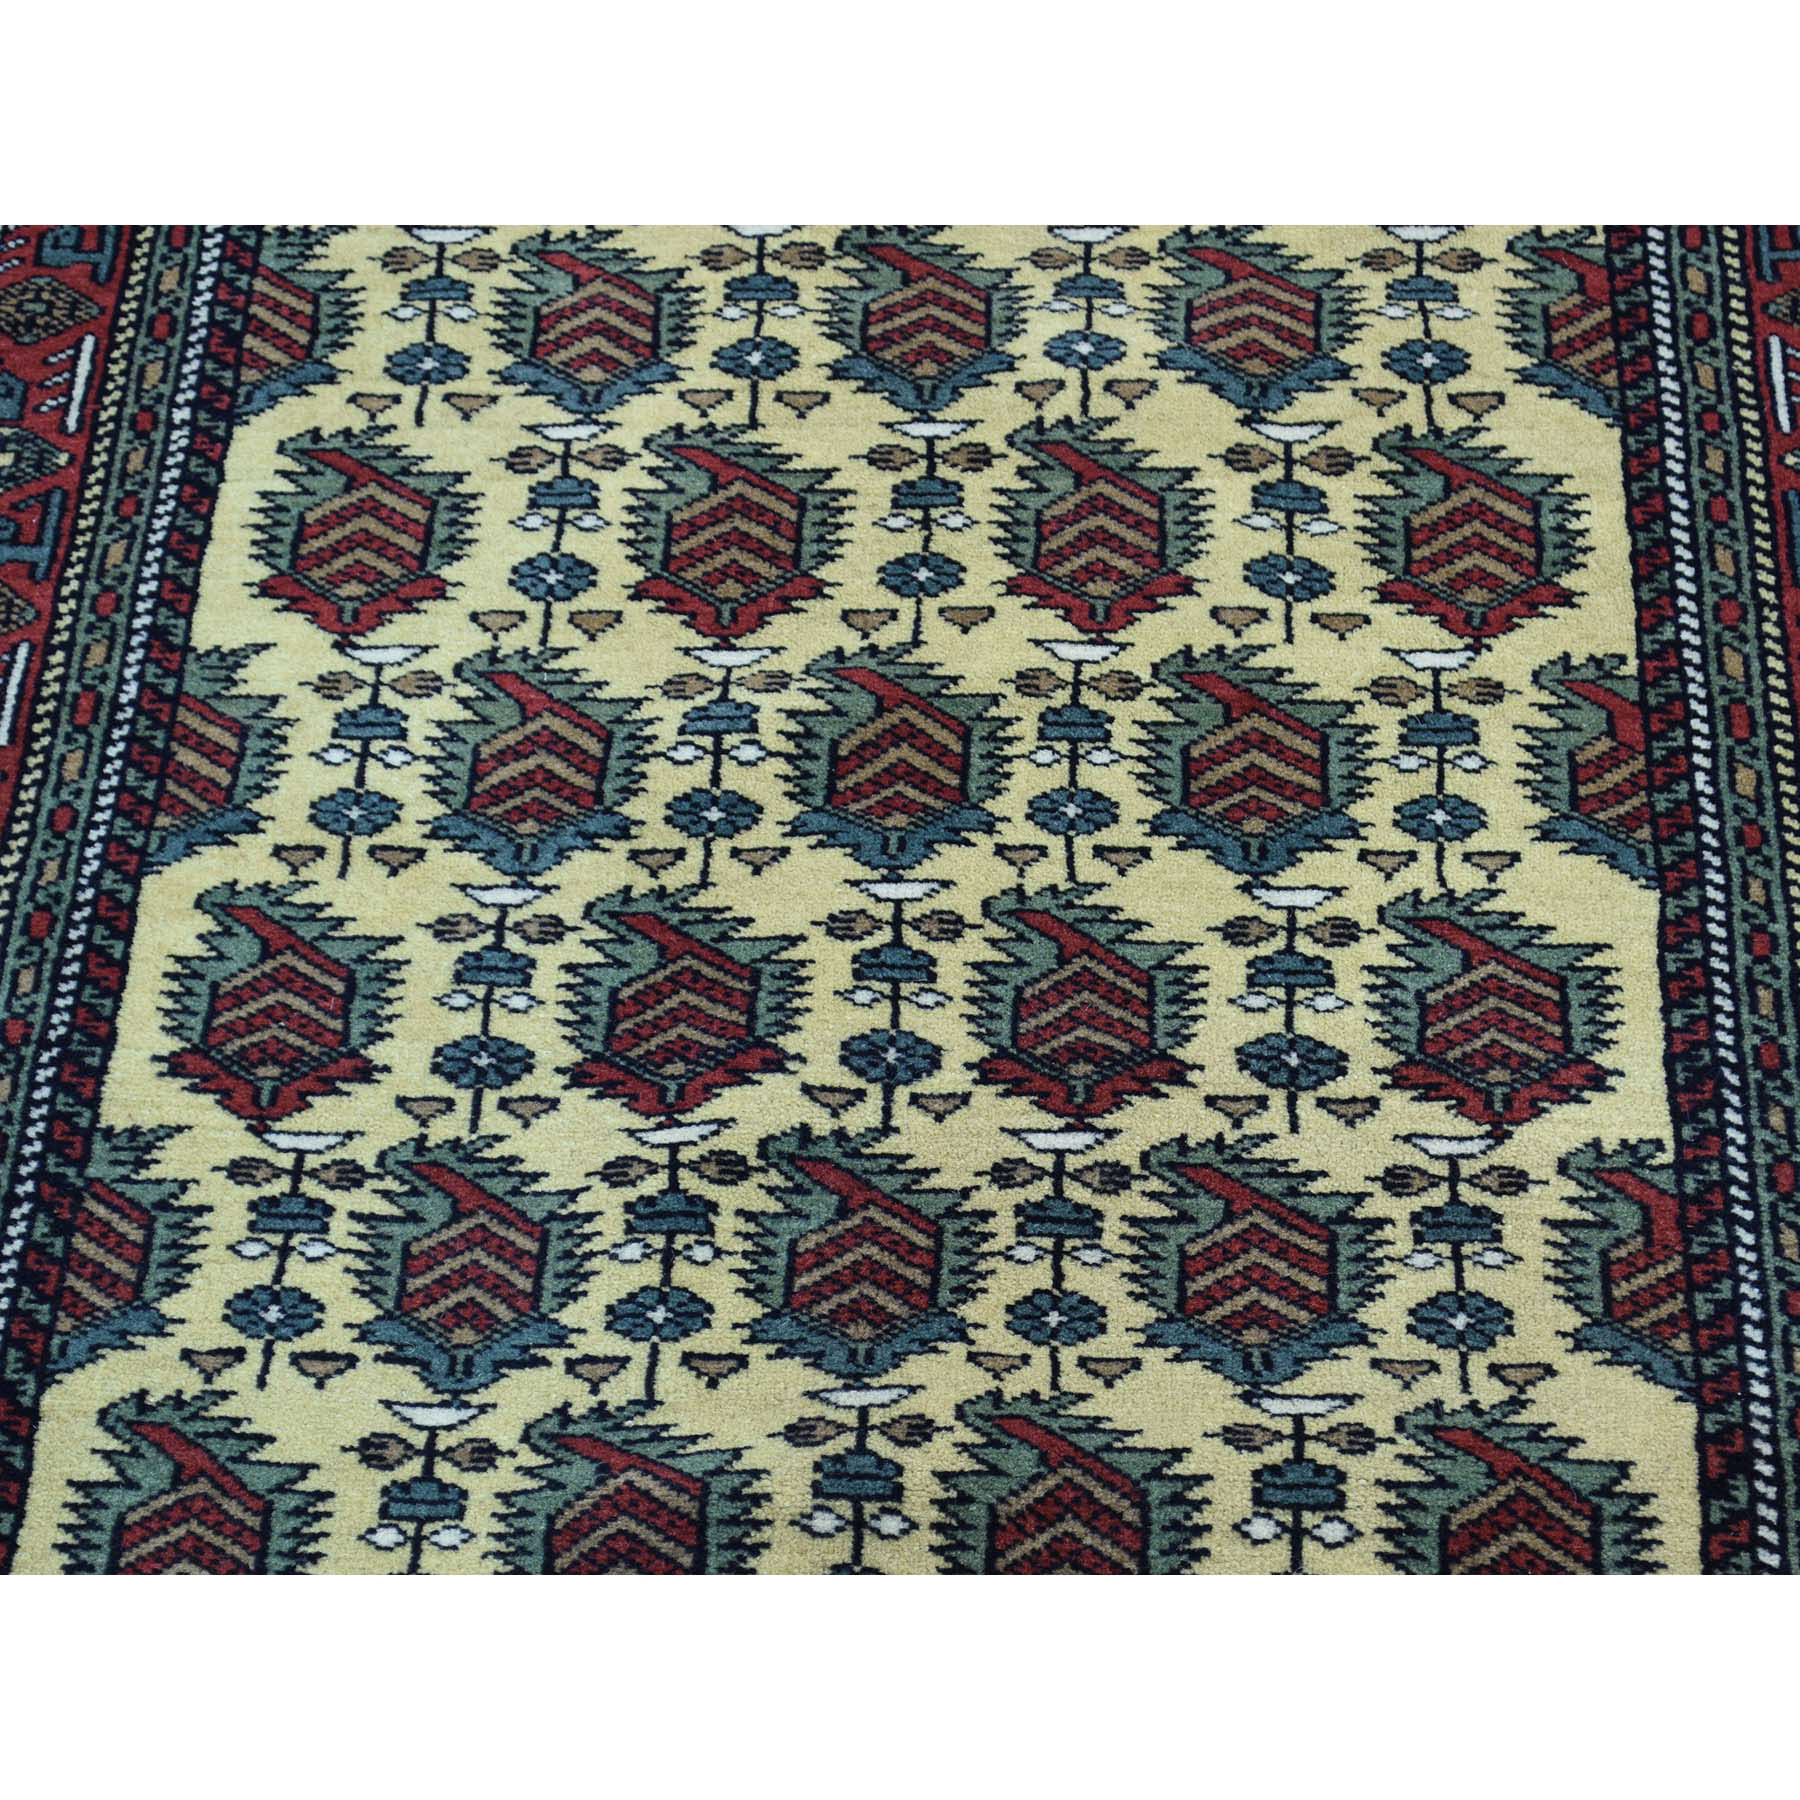 2-10 x13- Northwest Persian Hand-Knotted Tribal Oriental Runner Rug 